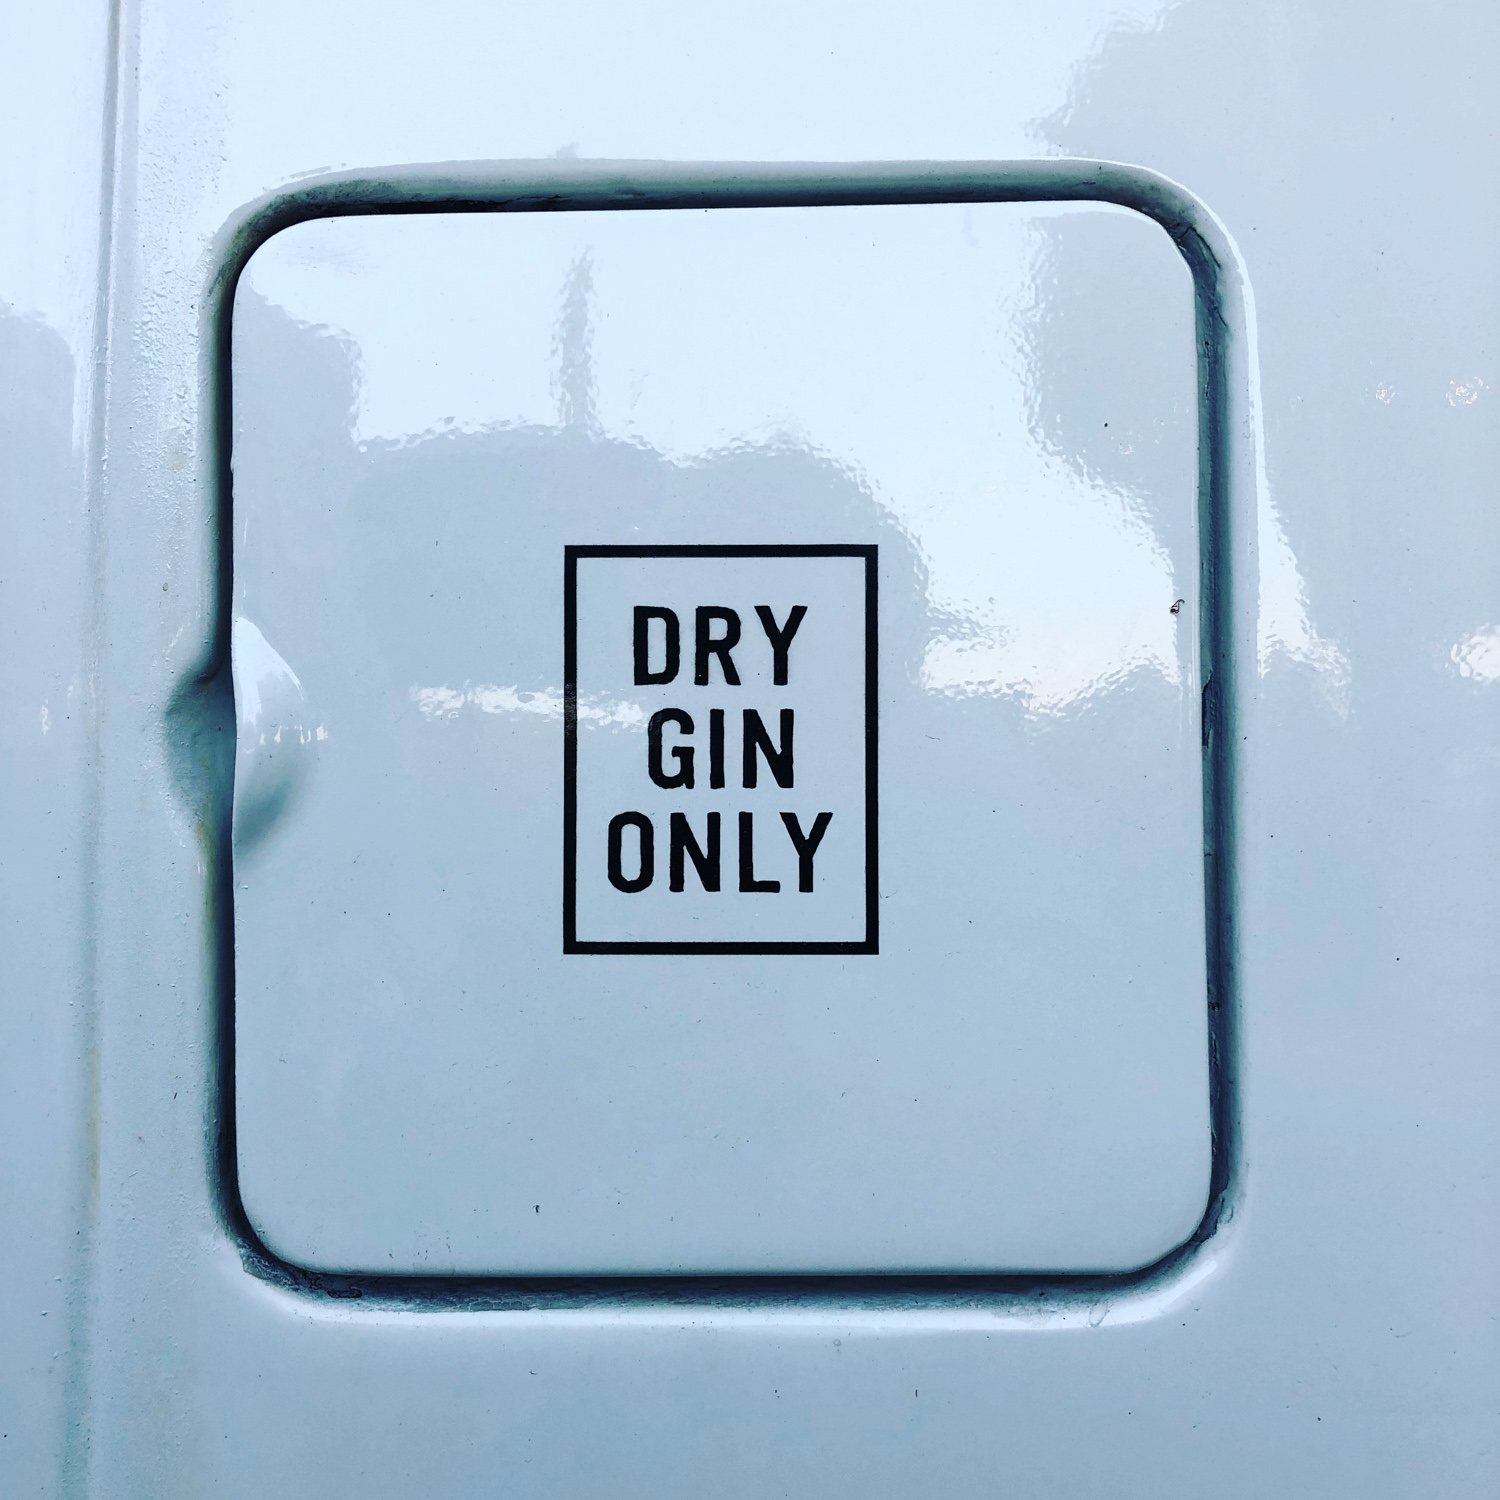 dry gin only